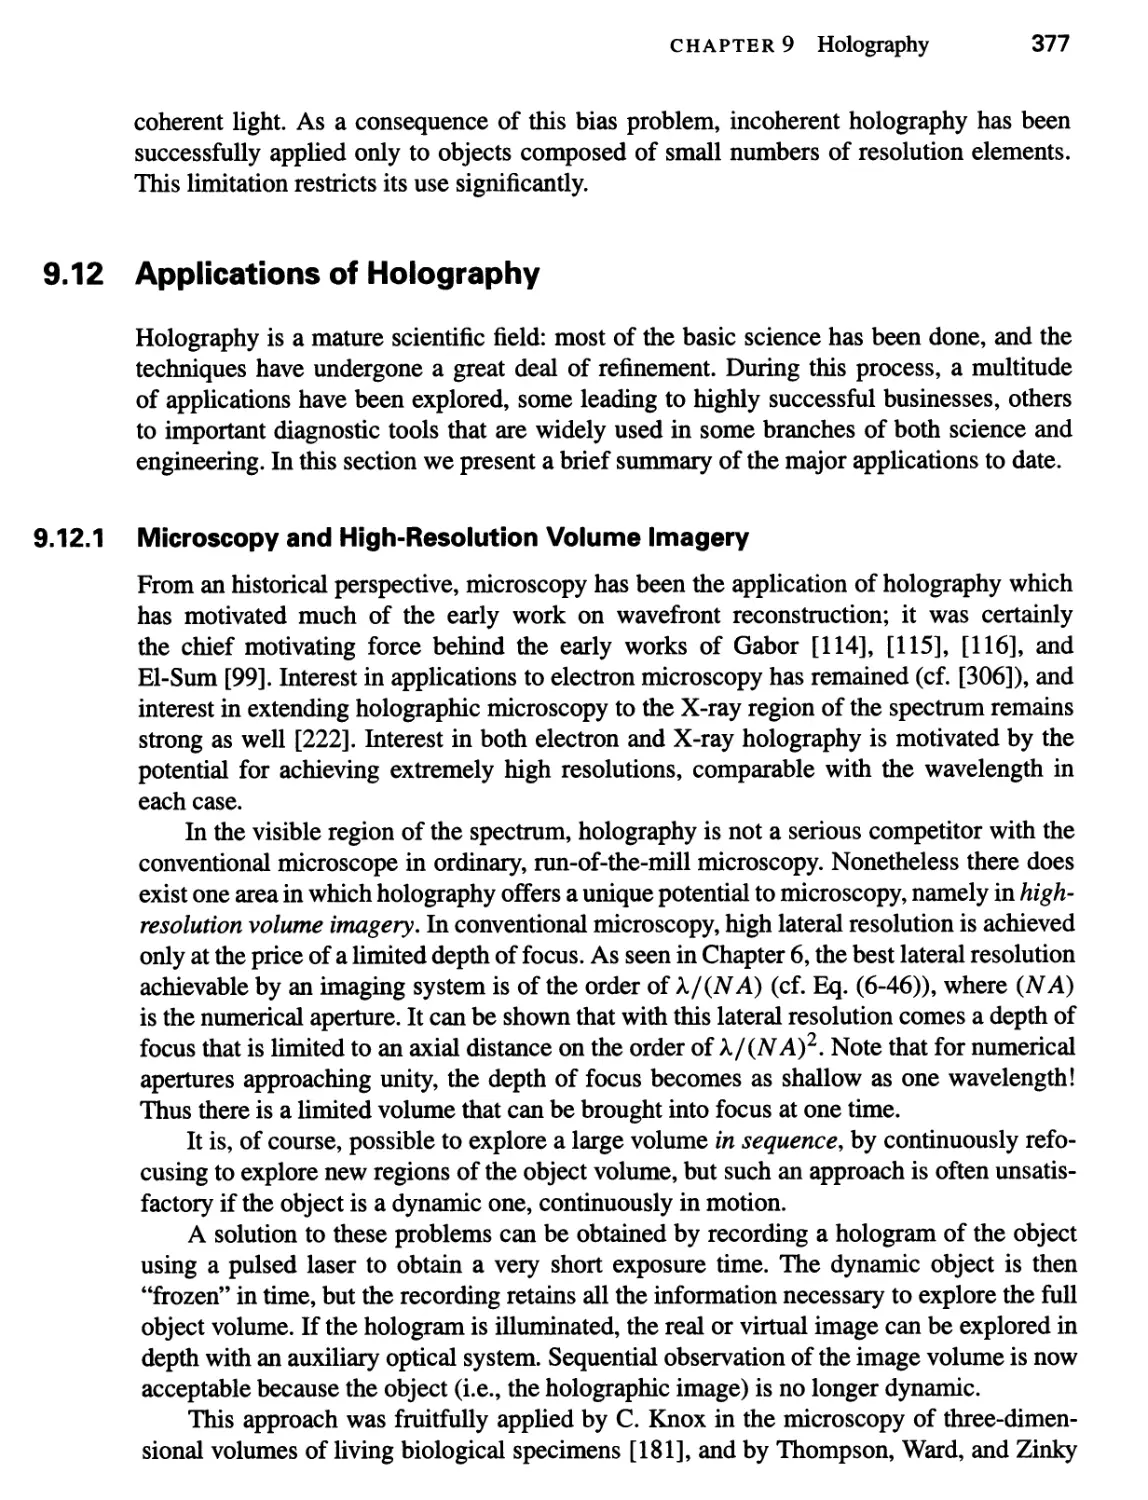 9.12 Applications of Holography 377